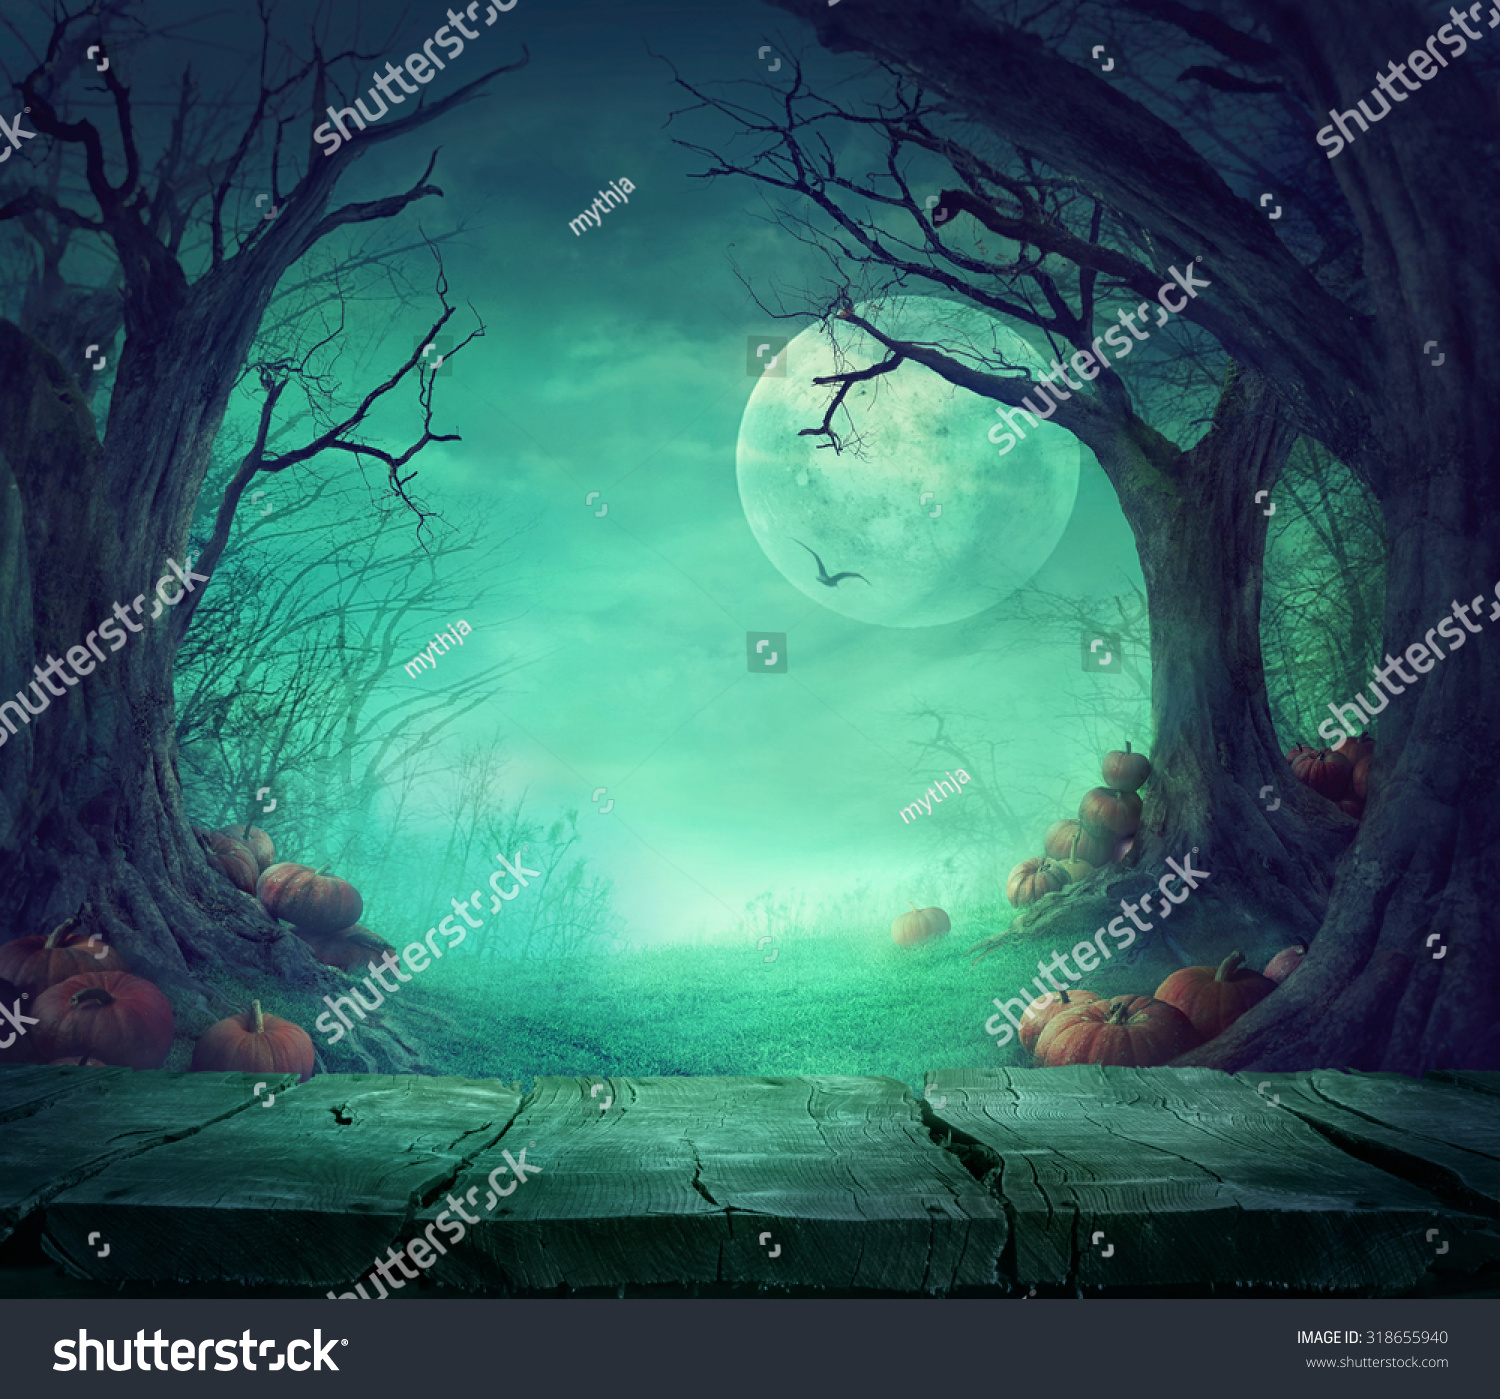 Halloween background. Spooky forest with dead trees and pumpkins and wooden table. Wood table. Halloween design with pumpkins #318655940